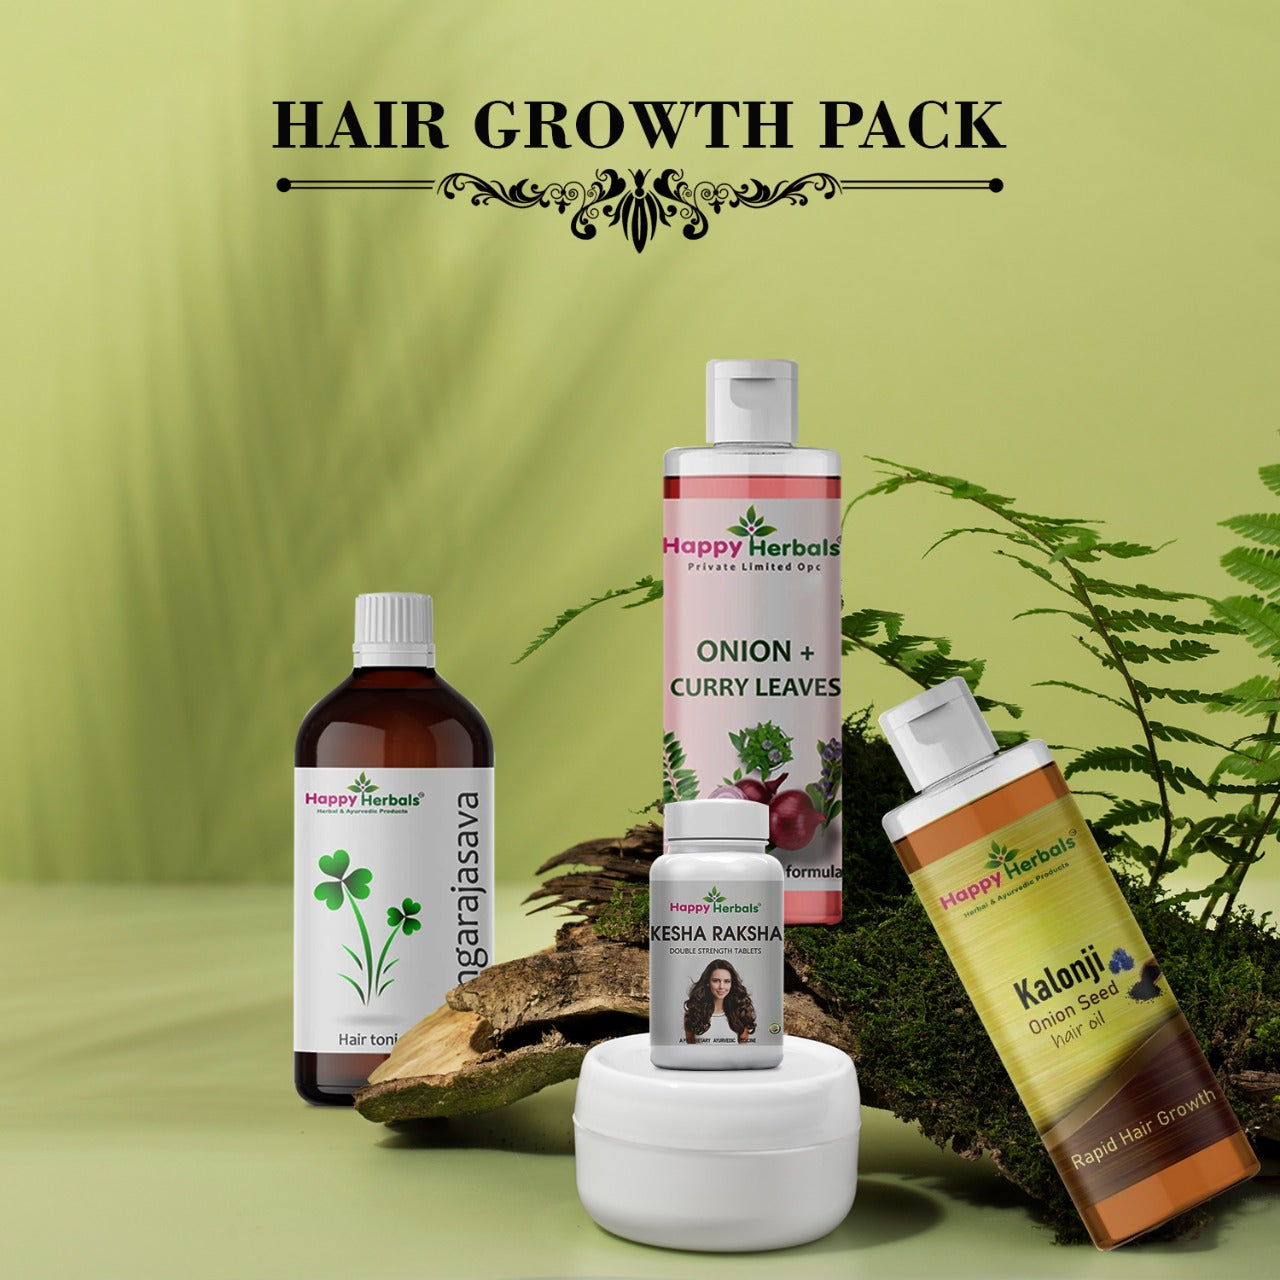 Details more than 81 curry leaves hair mask best - in.eteachers